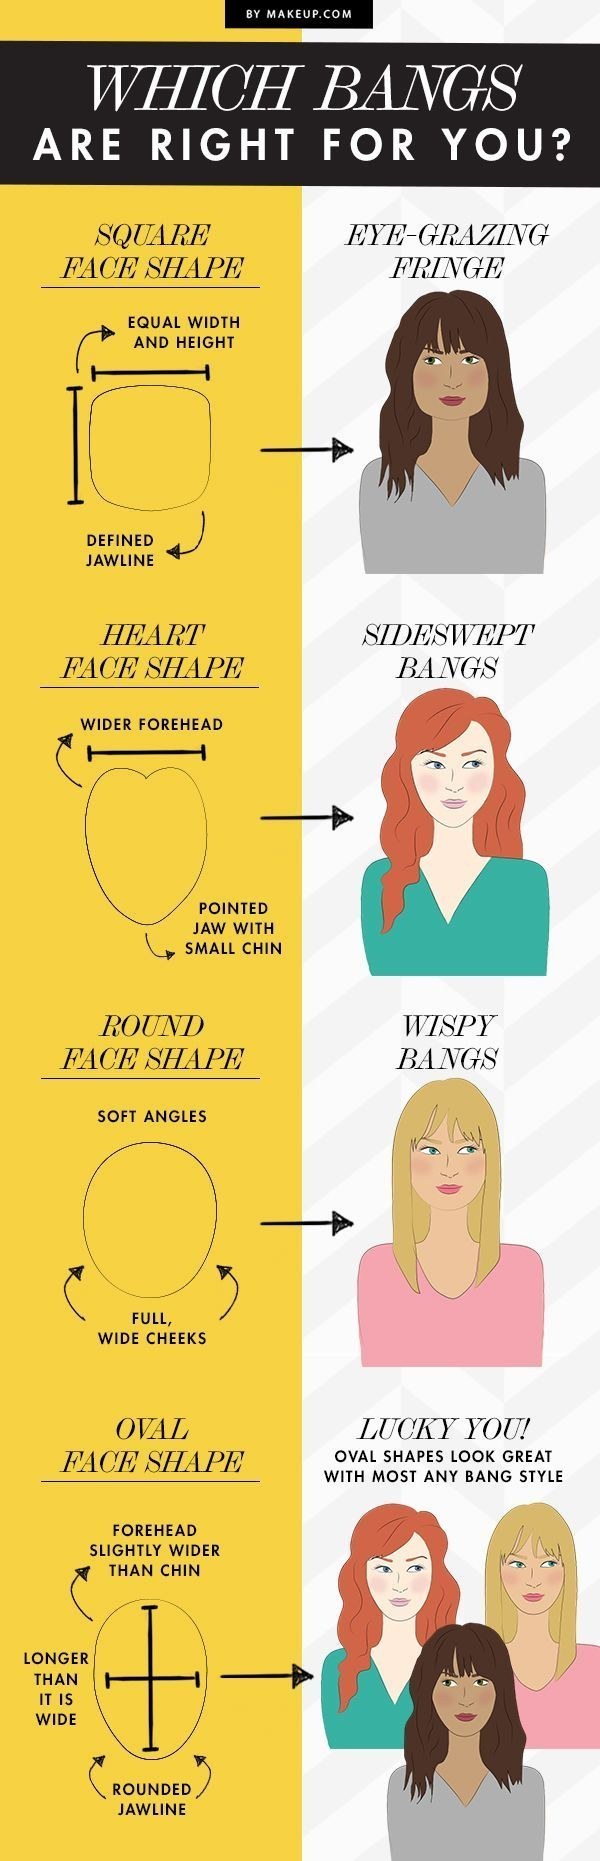 23 Tips and Tricks Every Woman Absolutely Needs To Know! - Gallery ...